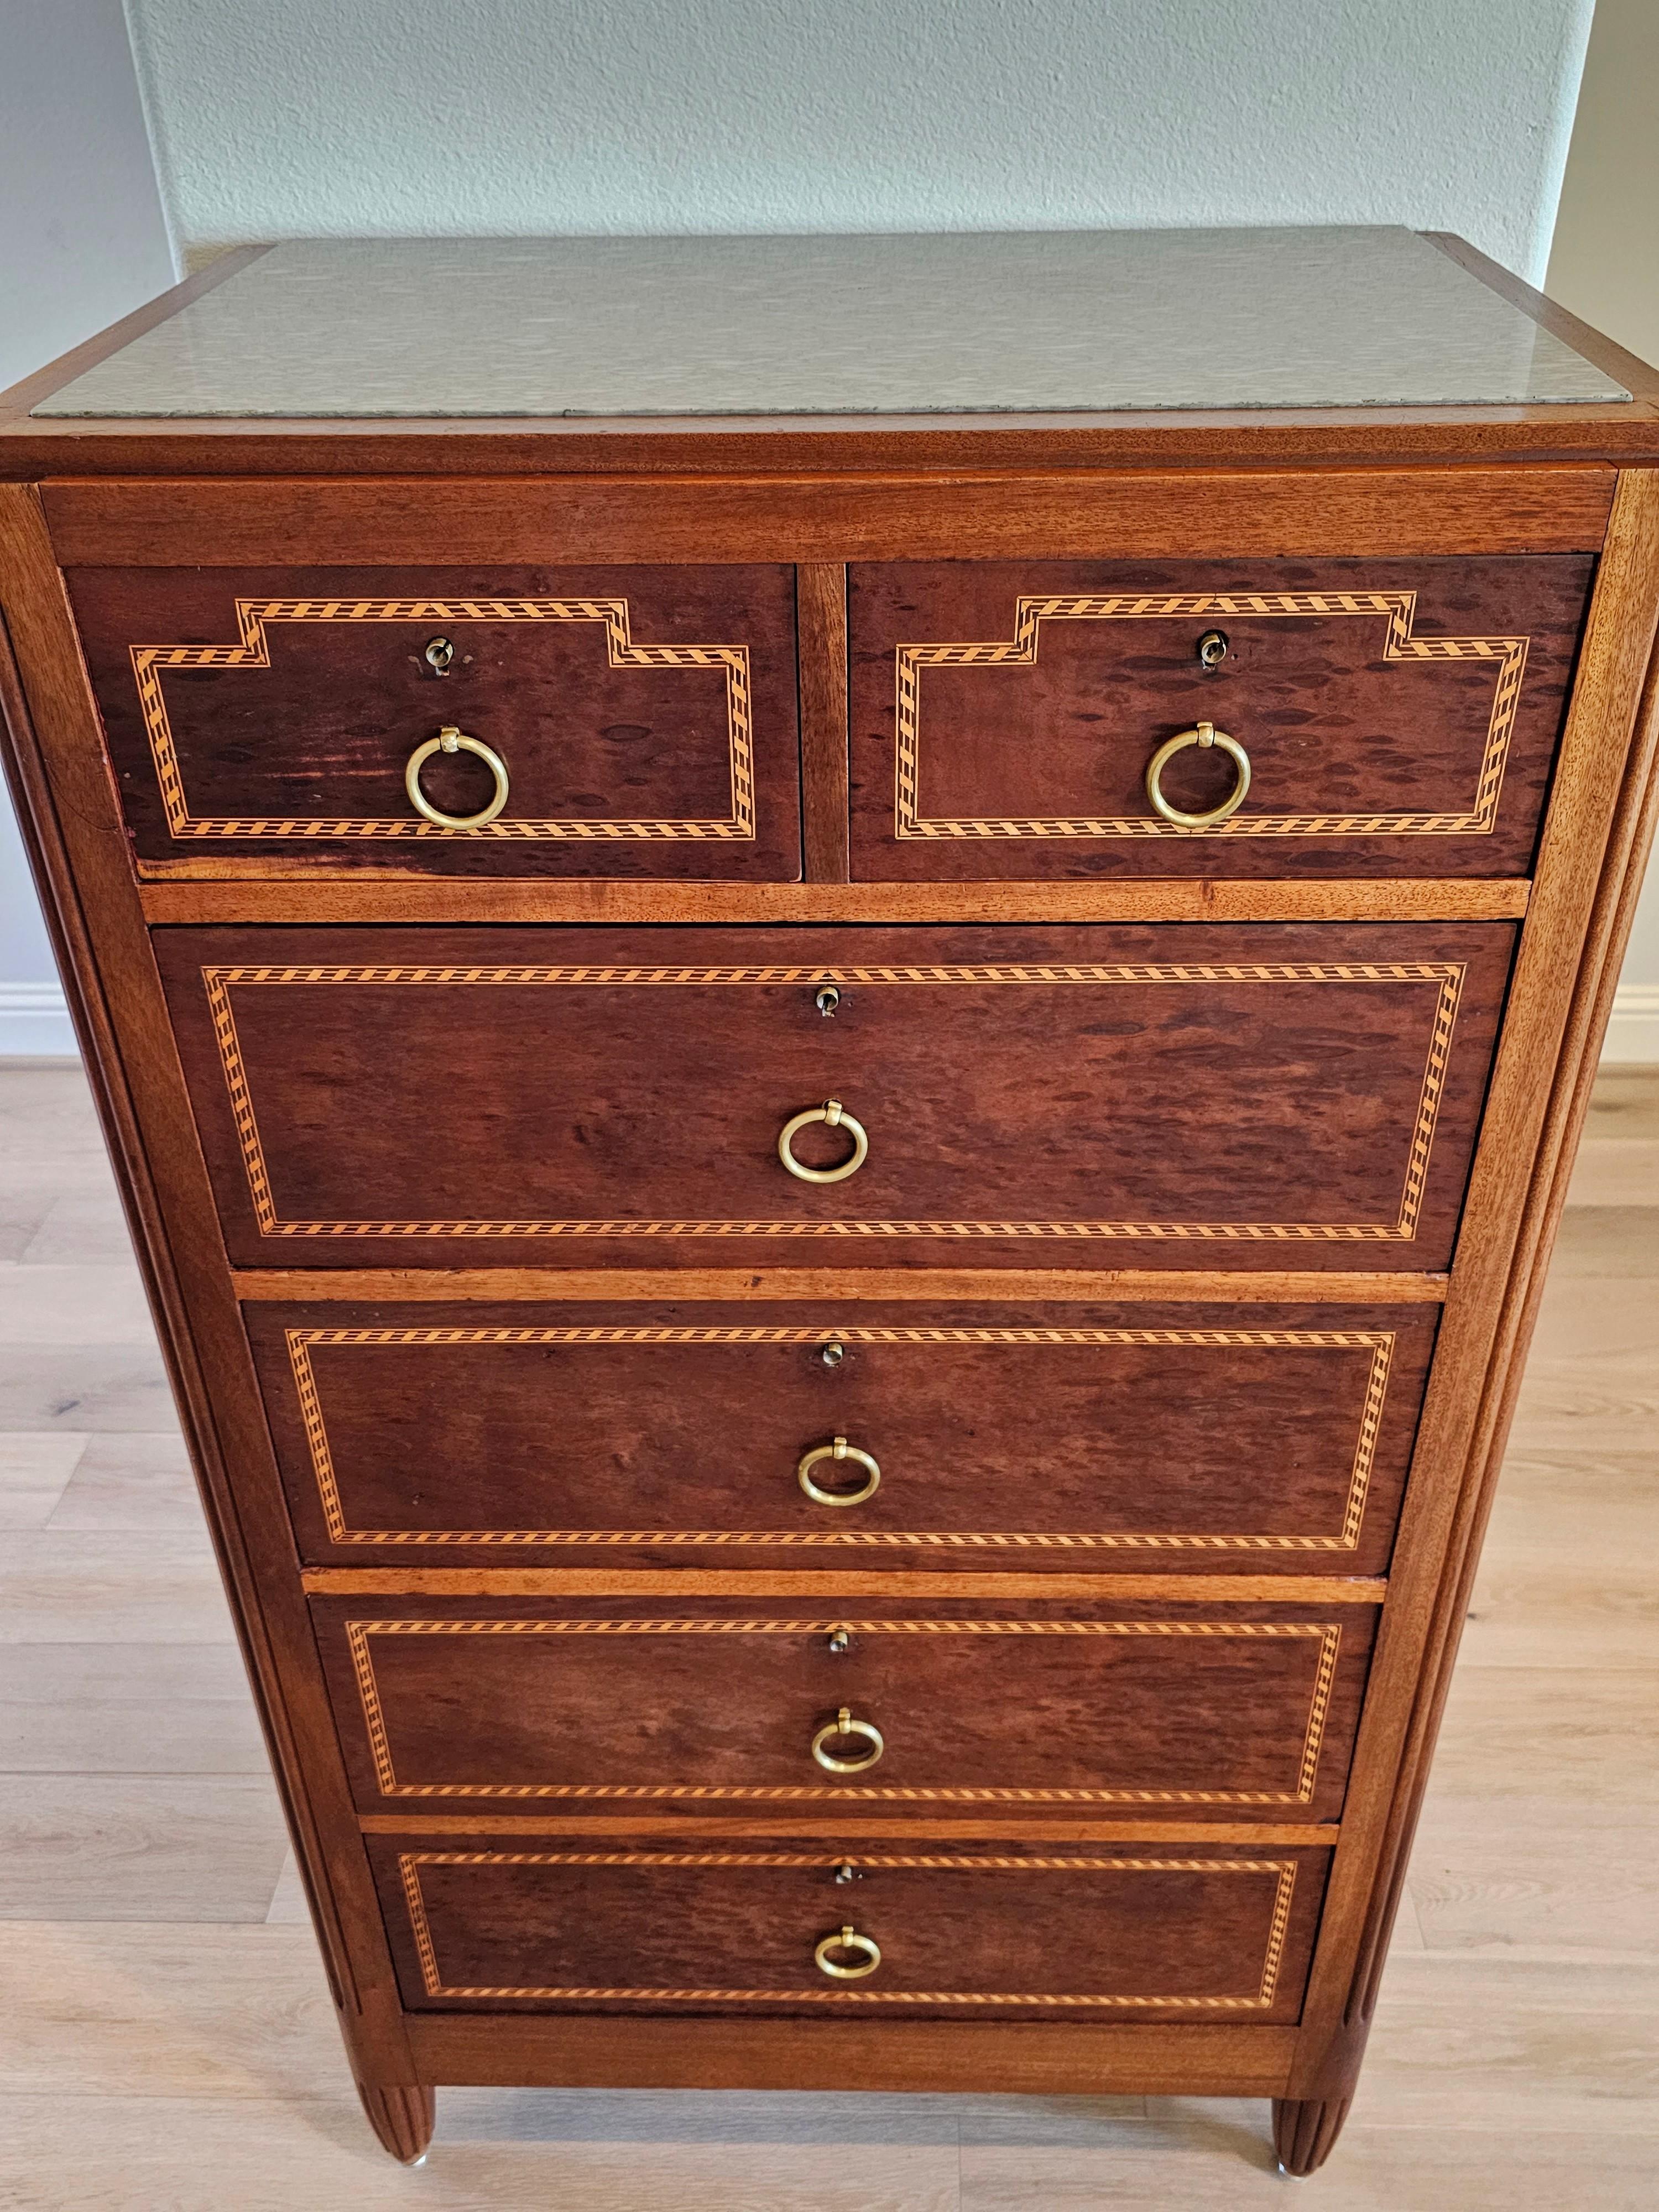 Rare French Art Deco Signed Mercier & Francisque Chaleyssin Chest of Drawers  In Good Condition For Sale In Forney, TX